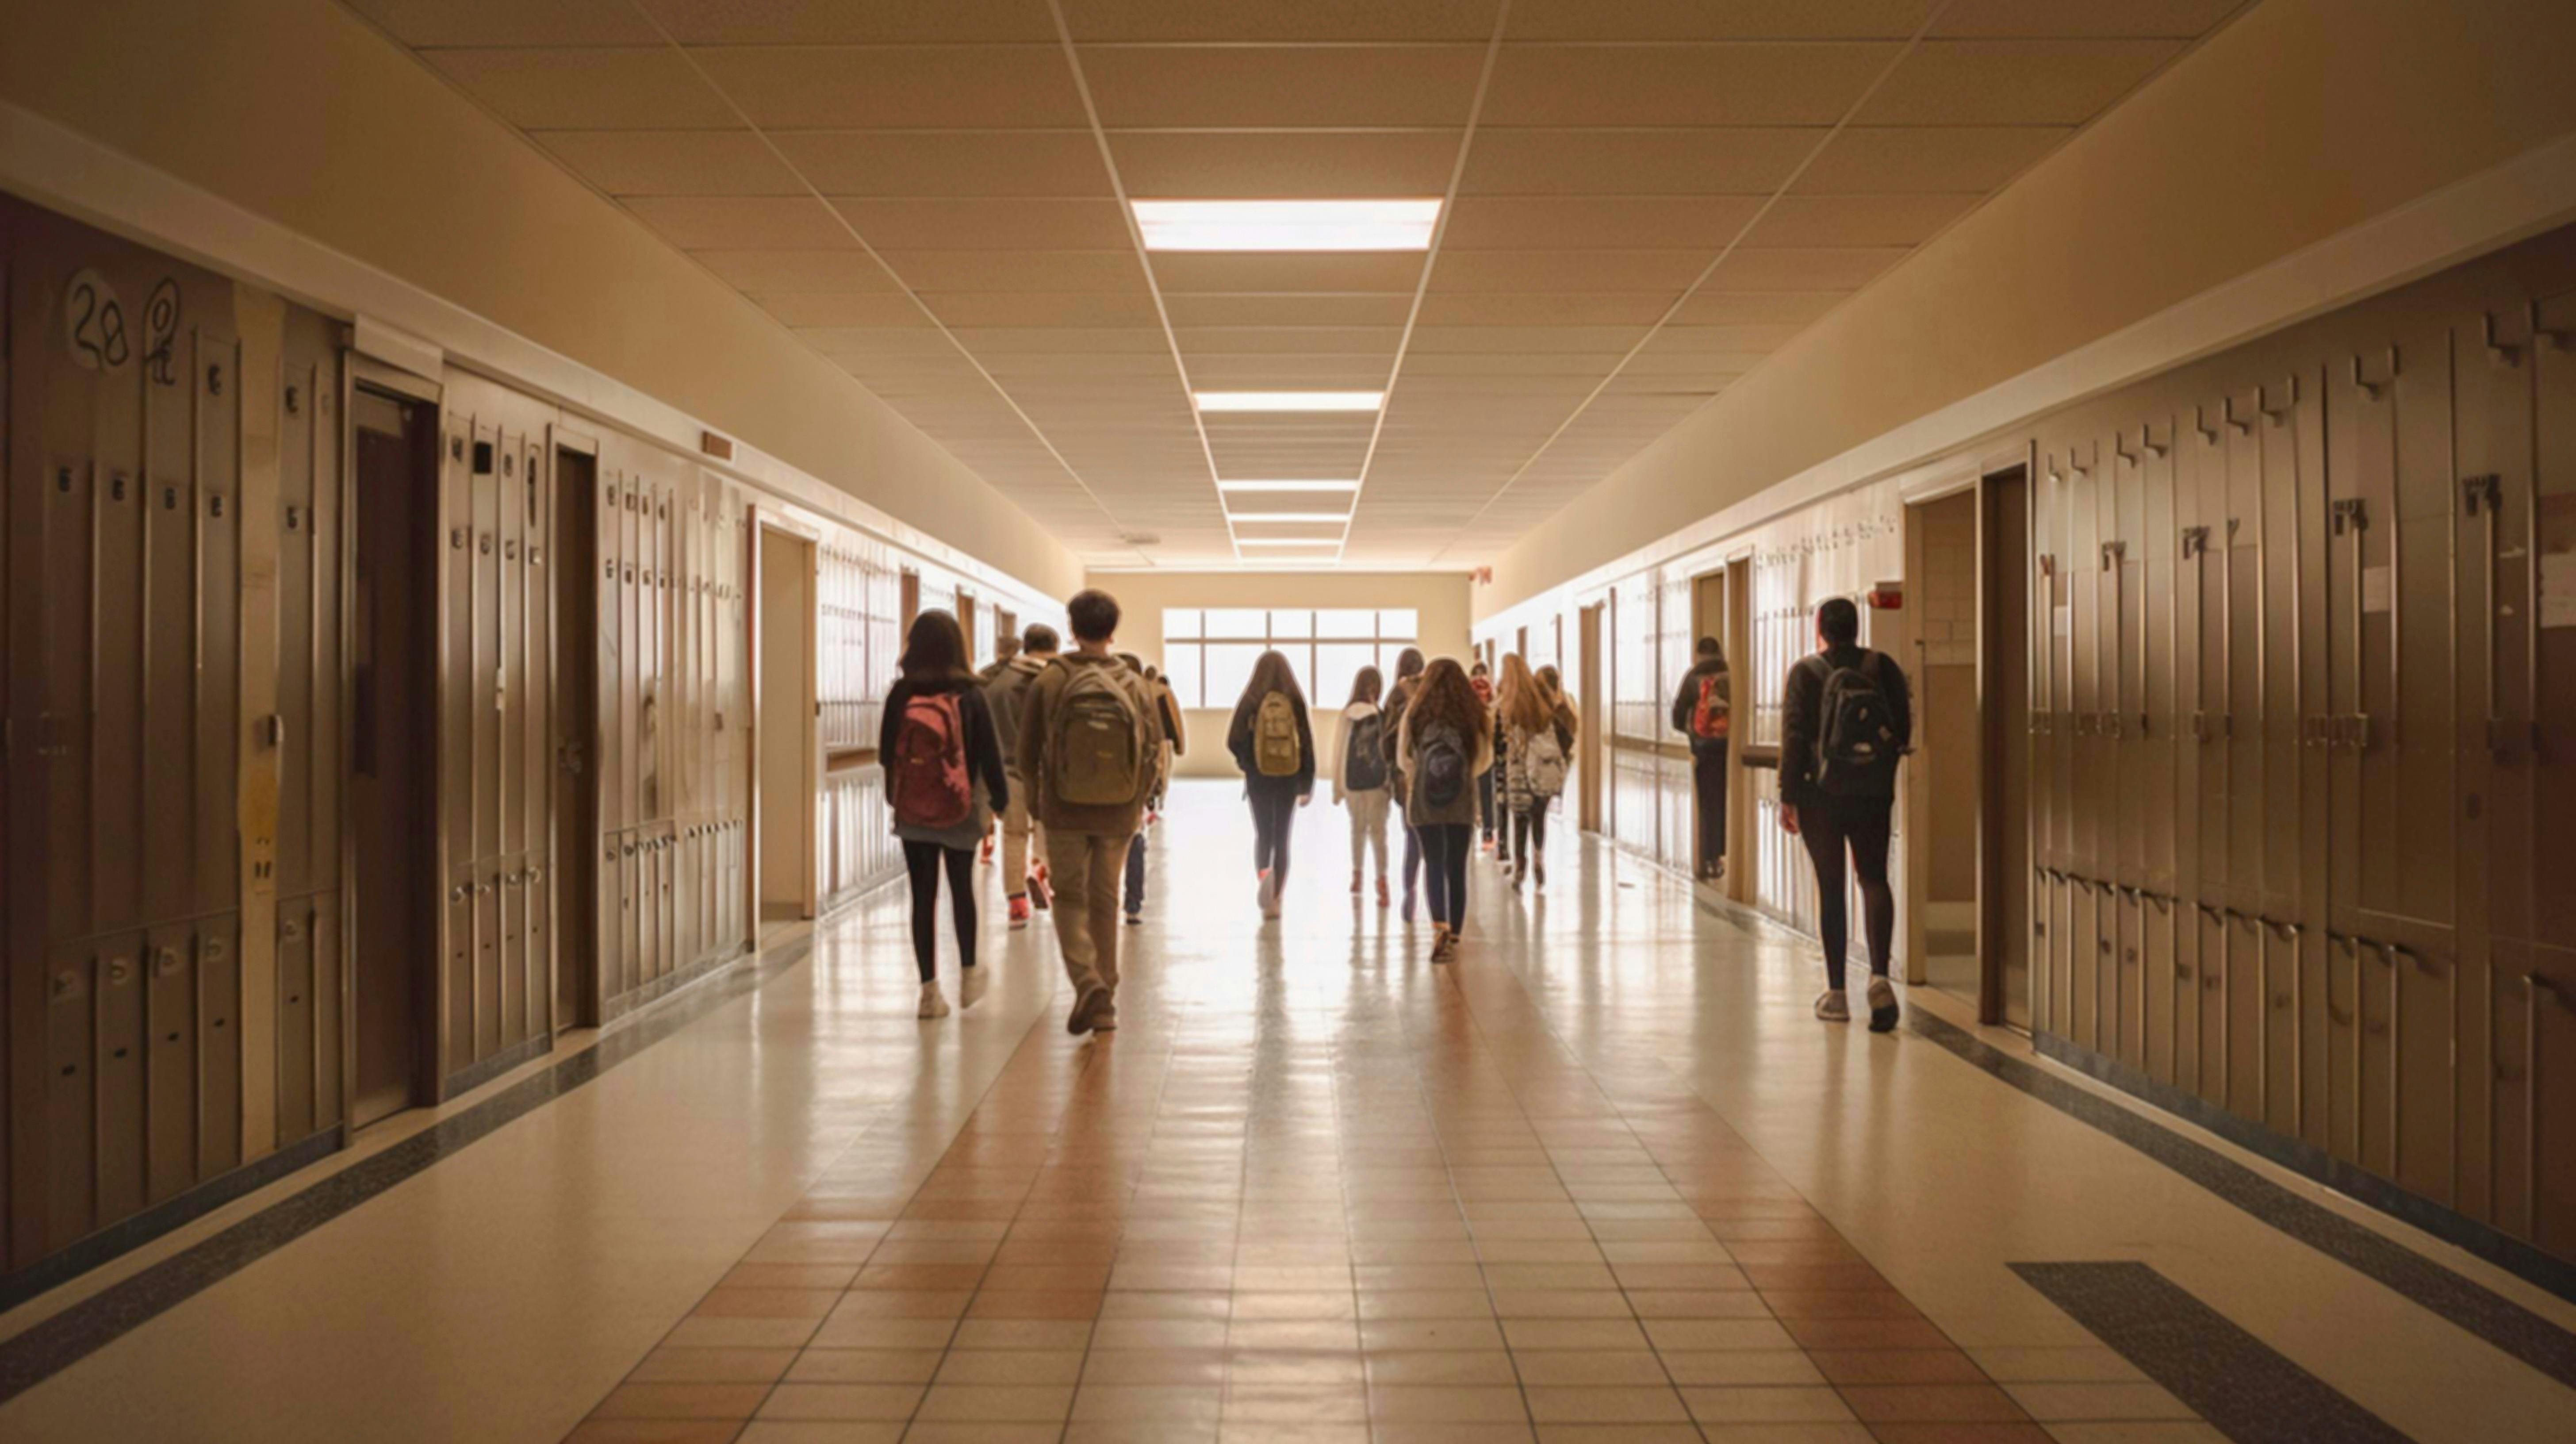 Hallway of a highschool with male and female students walking. 